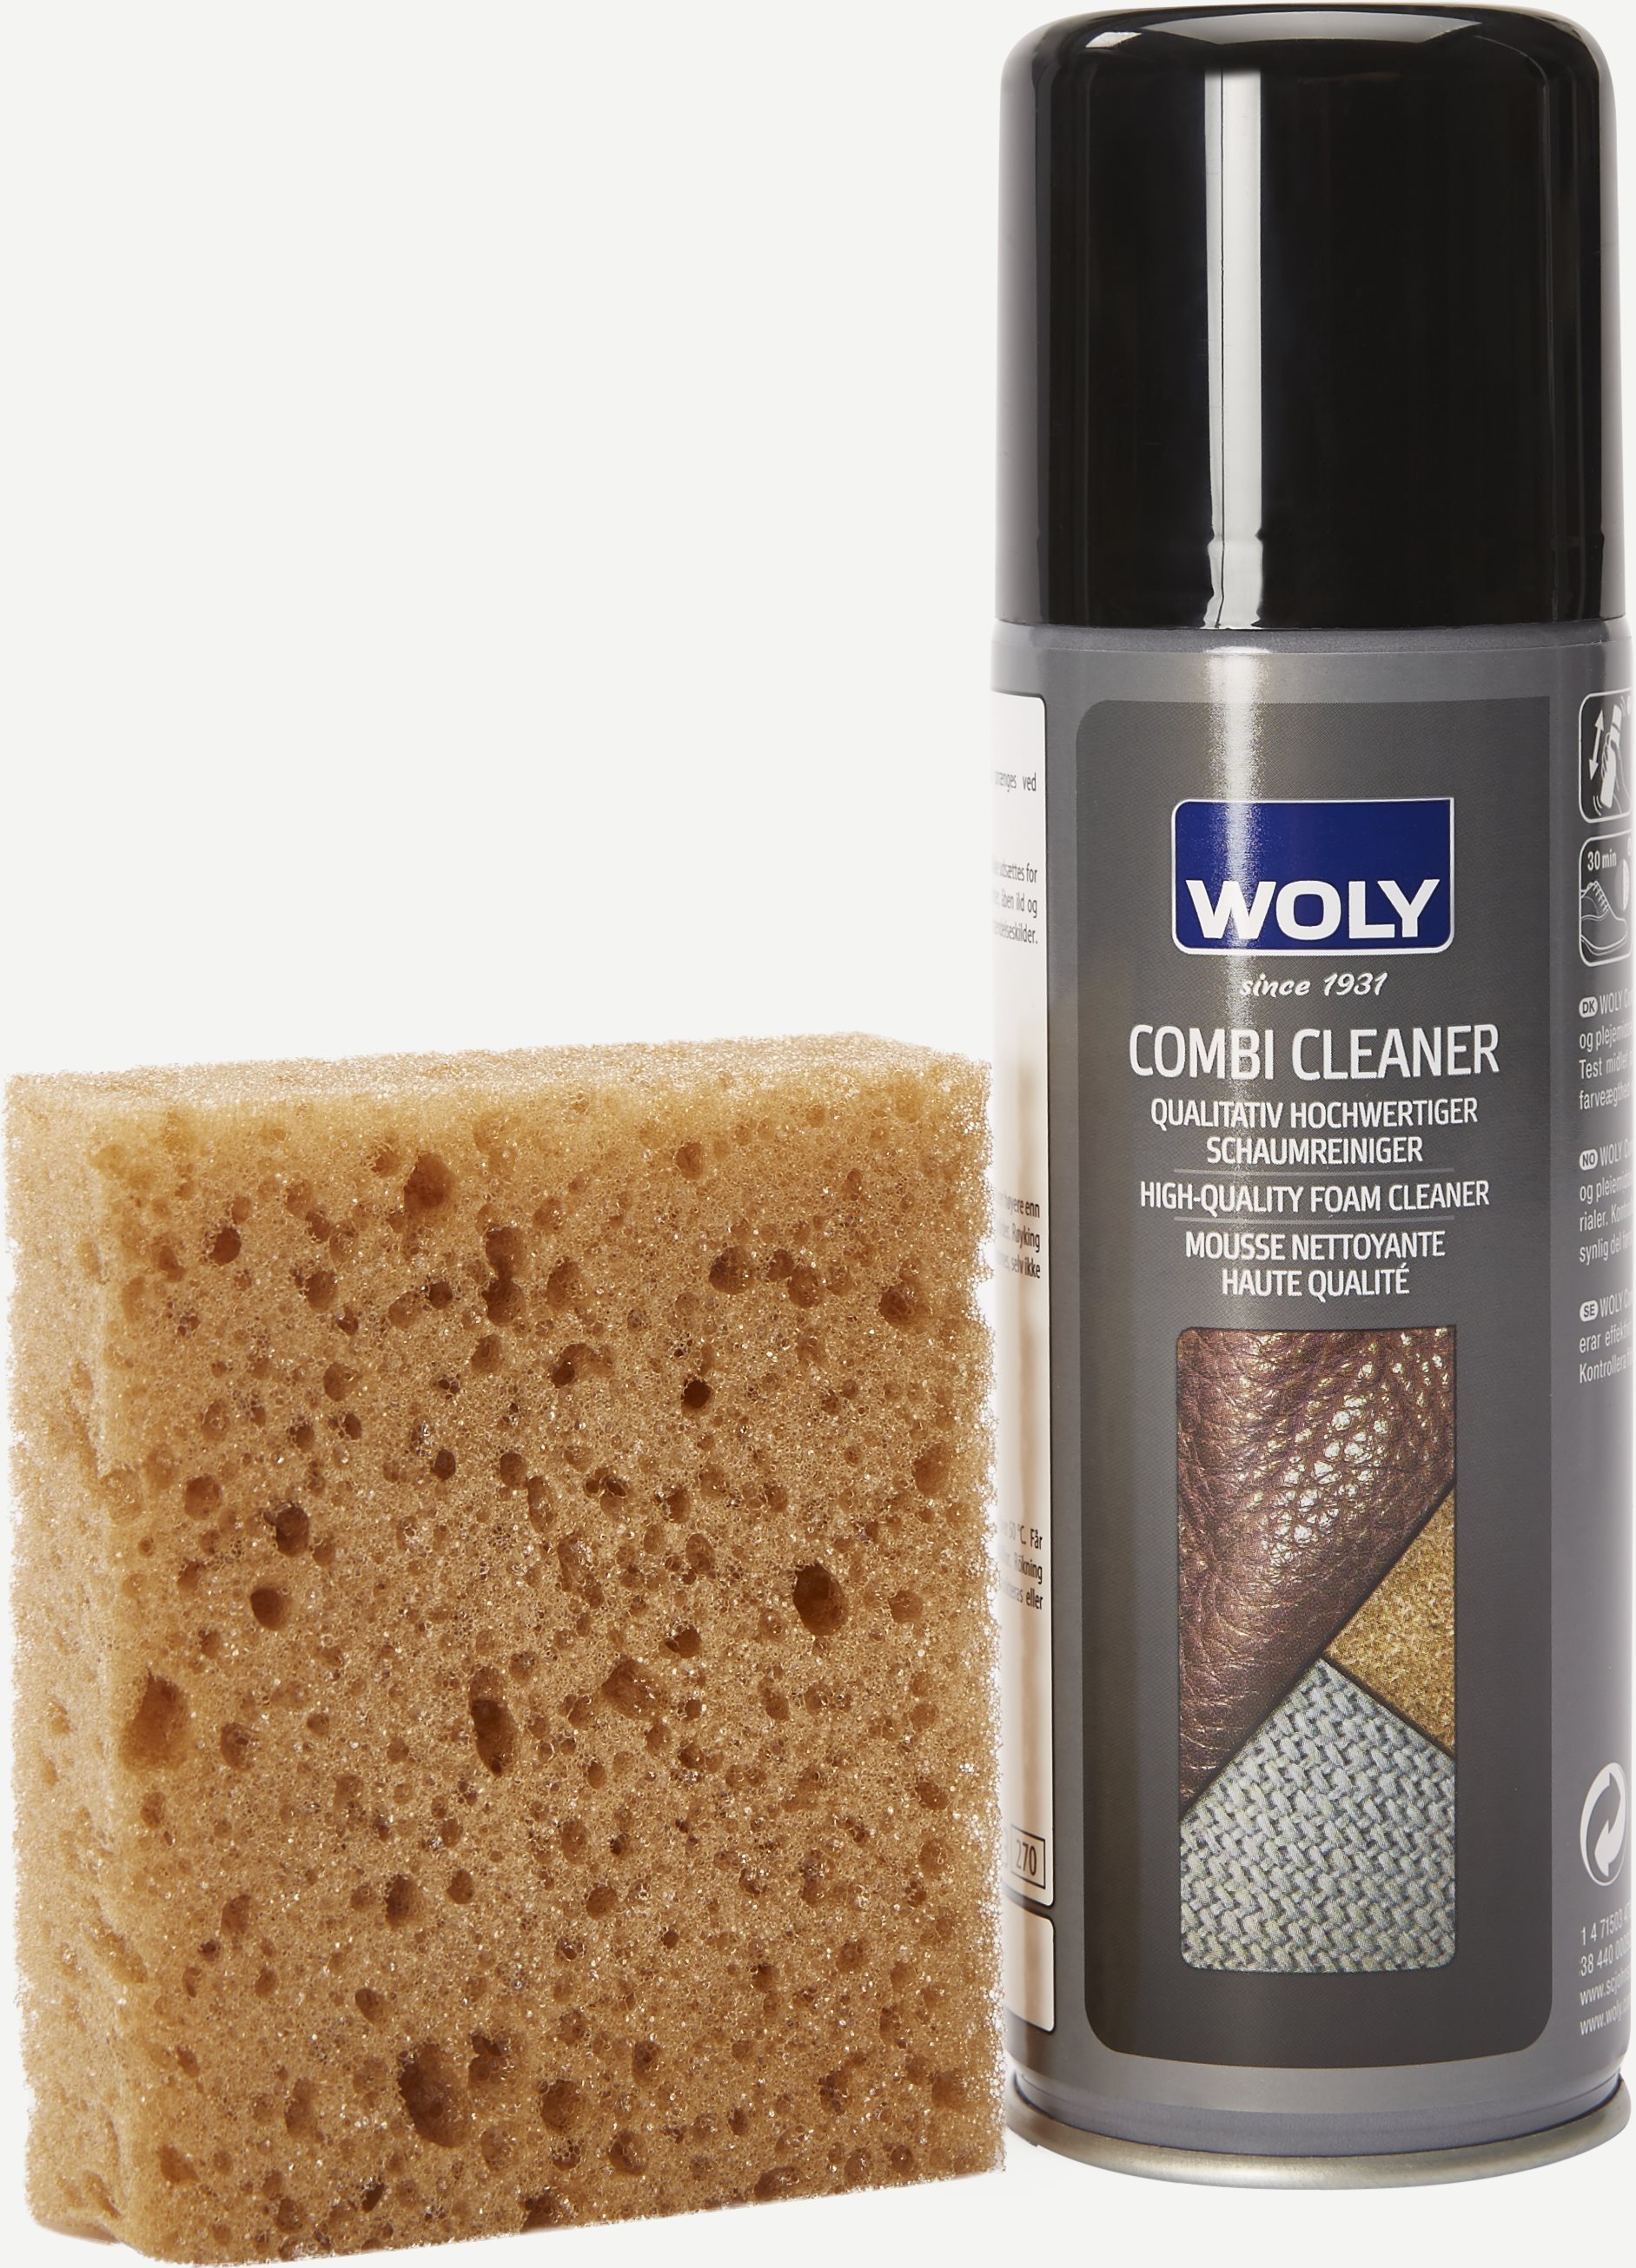 Woly Protector Accessories COMBI CLEANER BOX White